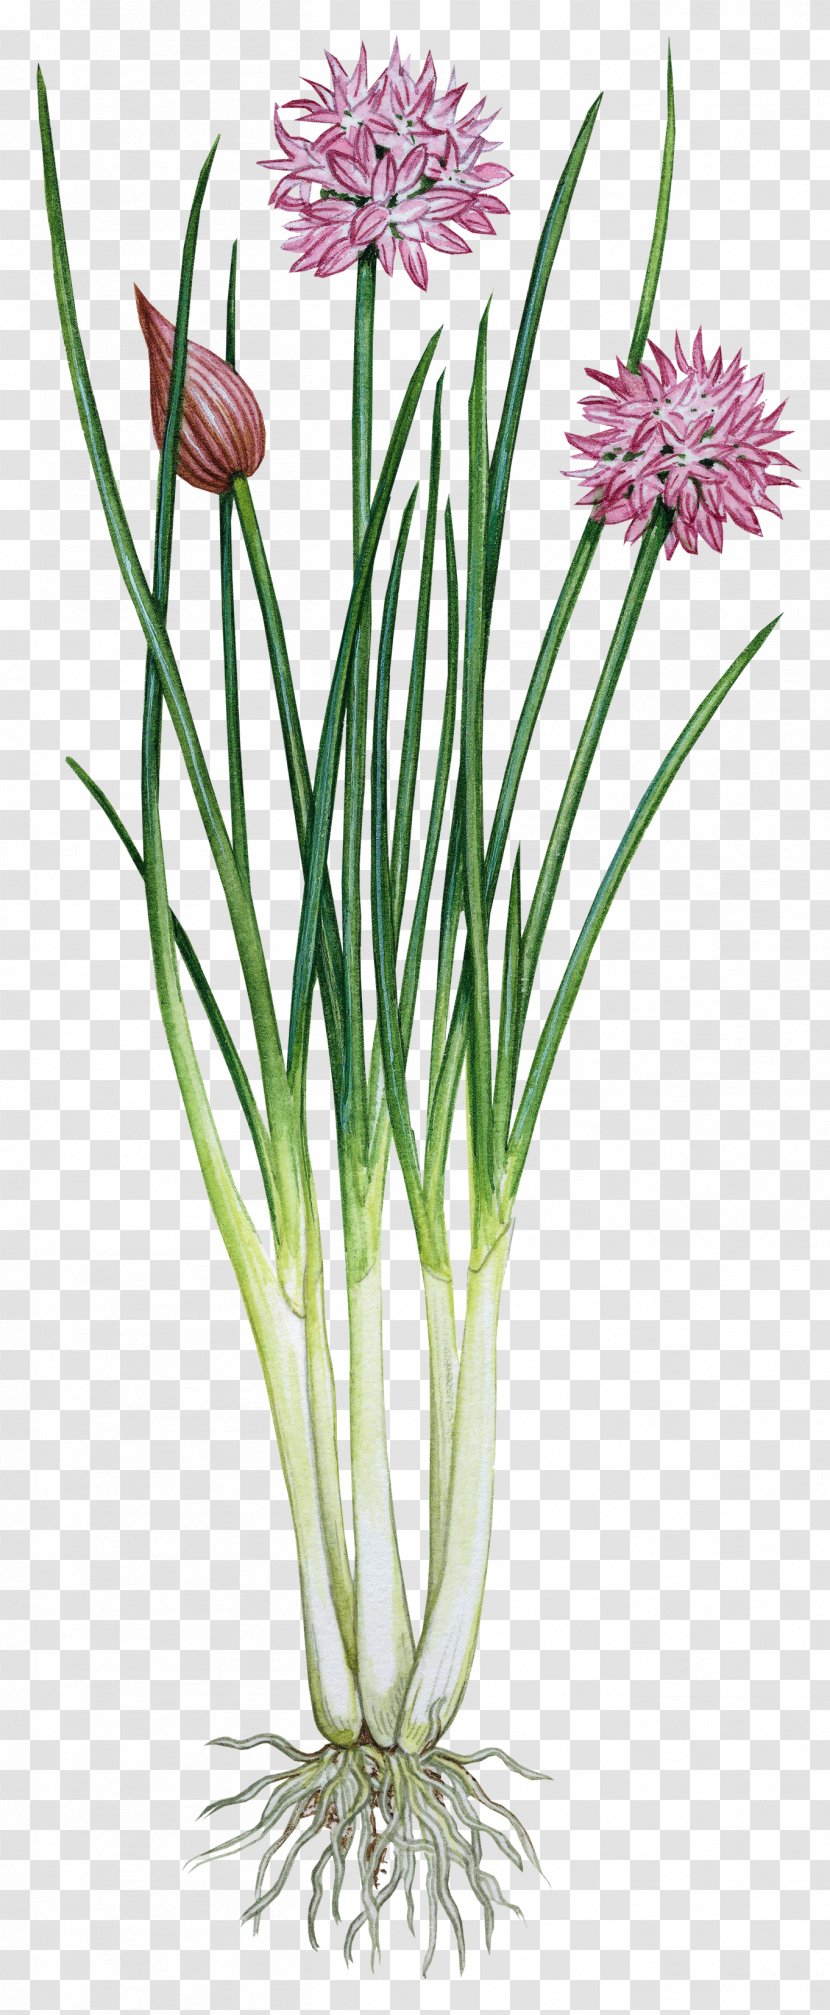 Garlic Chives Onion Herb - Flower - Herbs Transparent PNG